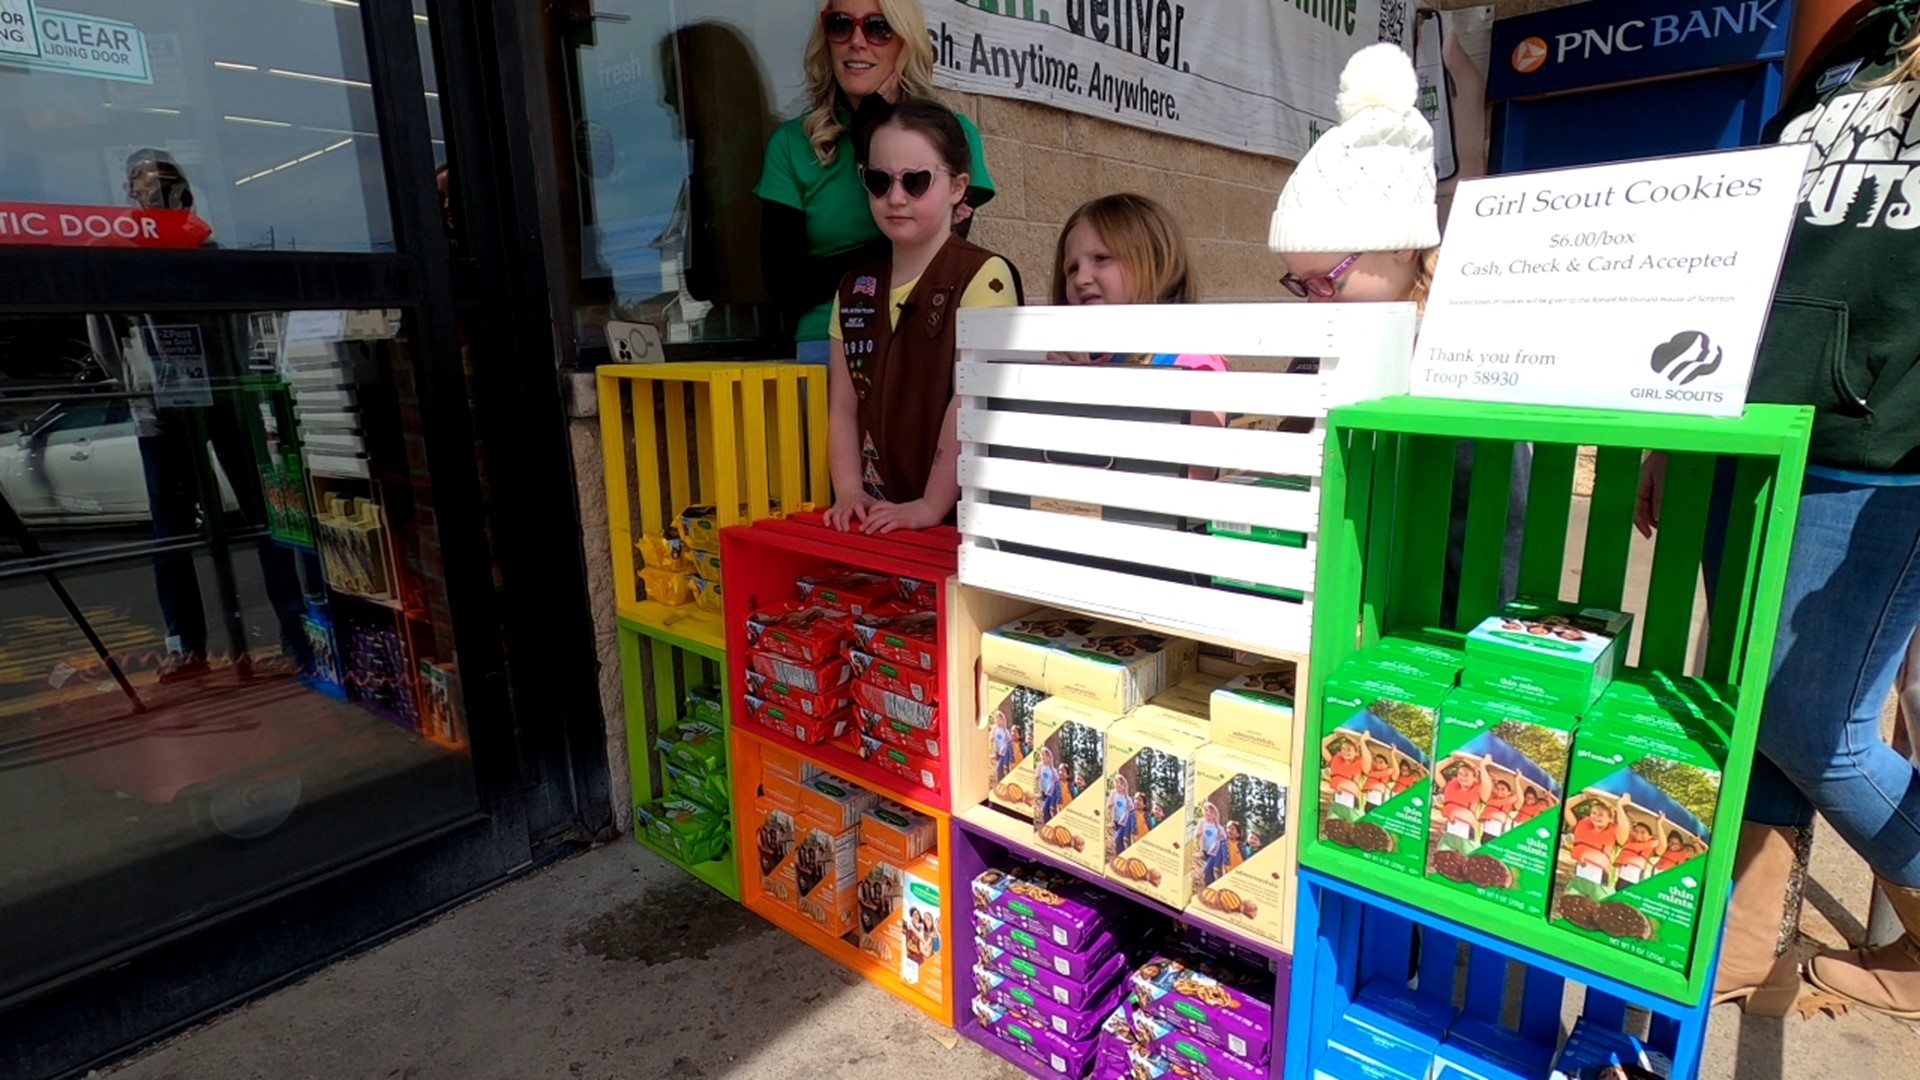 This week, Newswatch 16's Chelsea Strub tagged along with a local Girl Scout Troop to see what it takes to sell their beloved cookies.